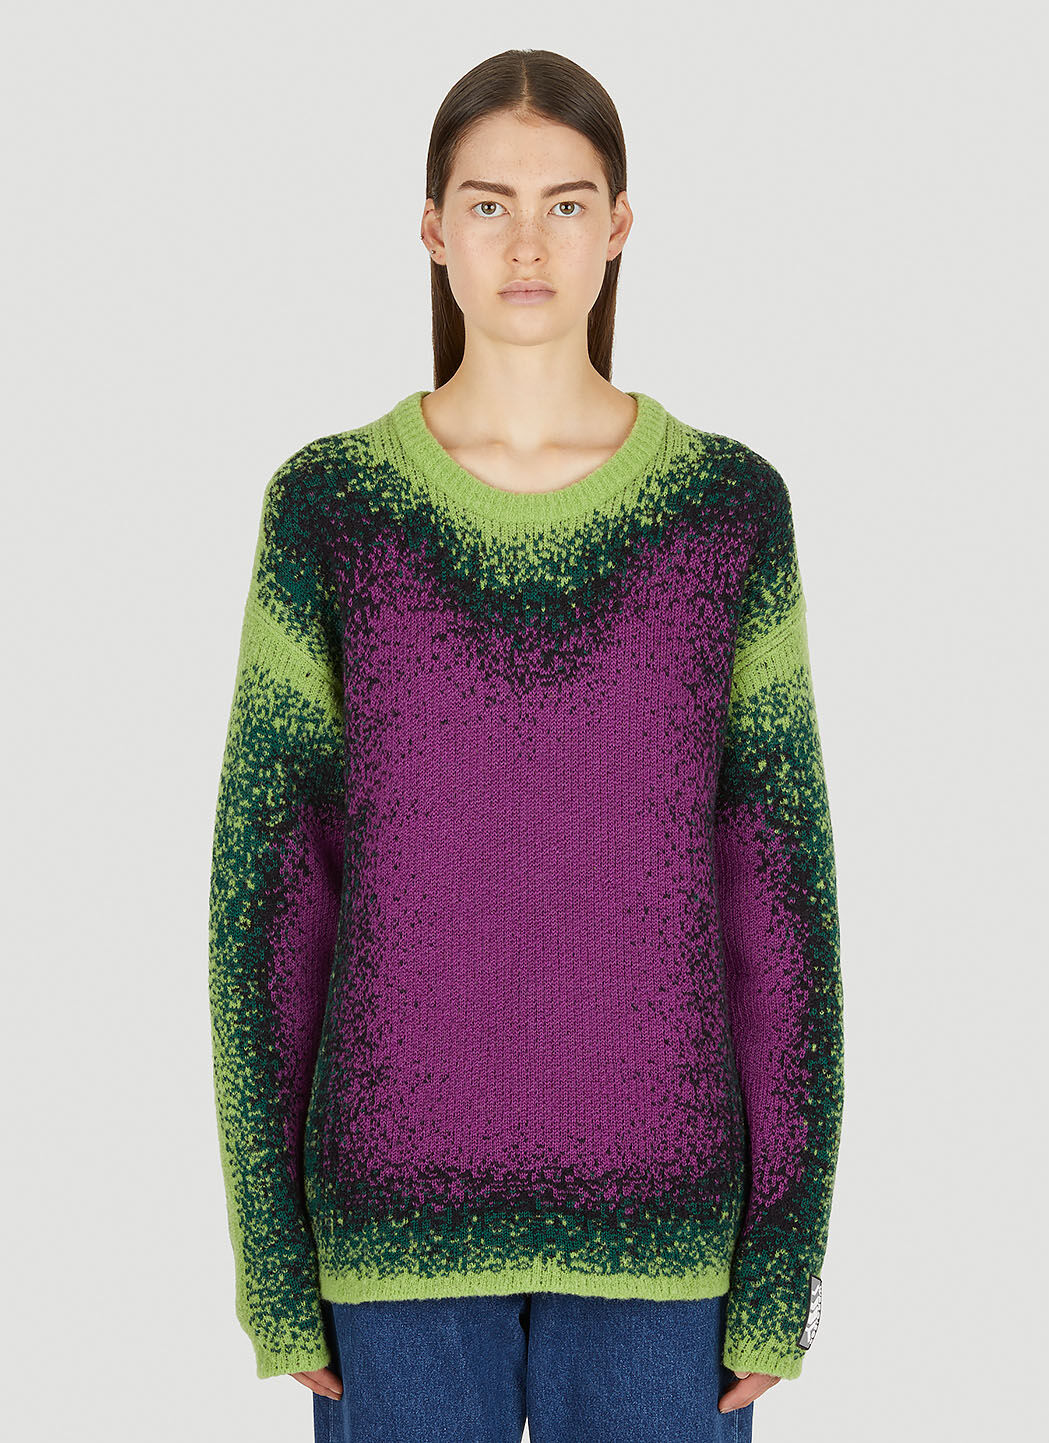 Y/Project Gradient Knit Sweater in Green | LN-CC